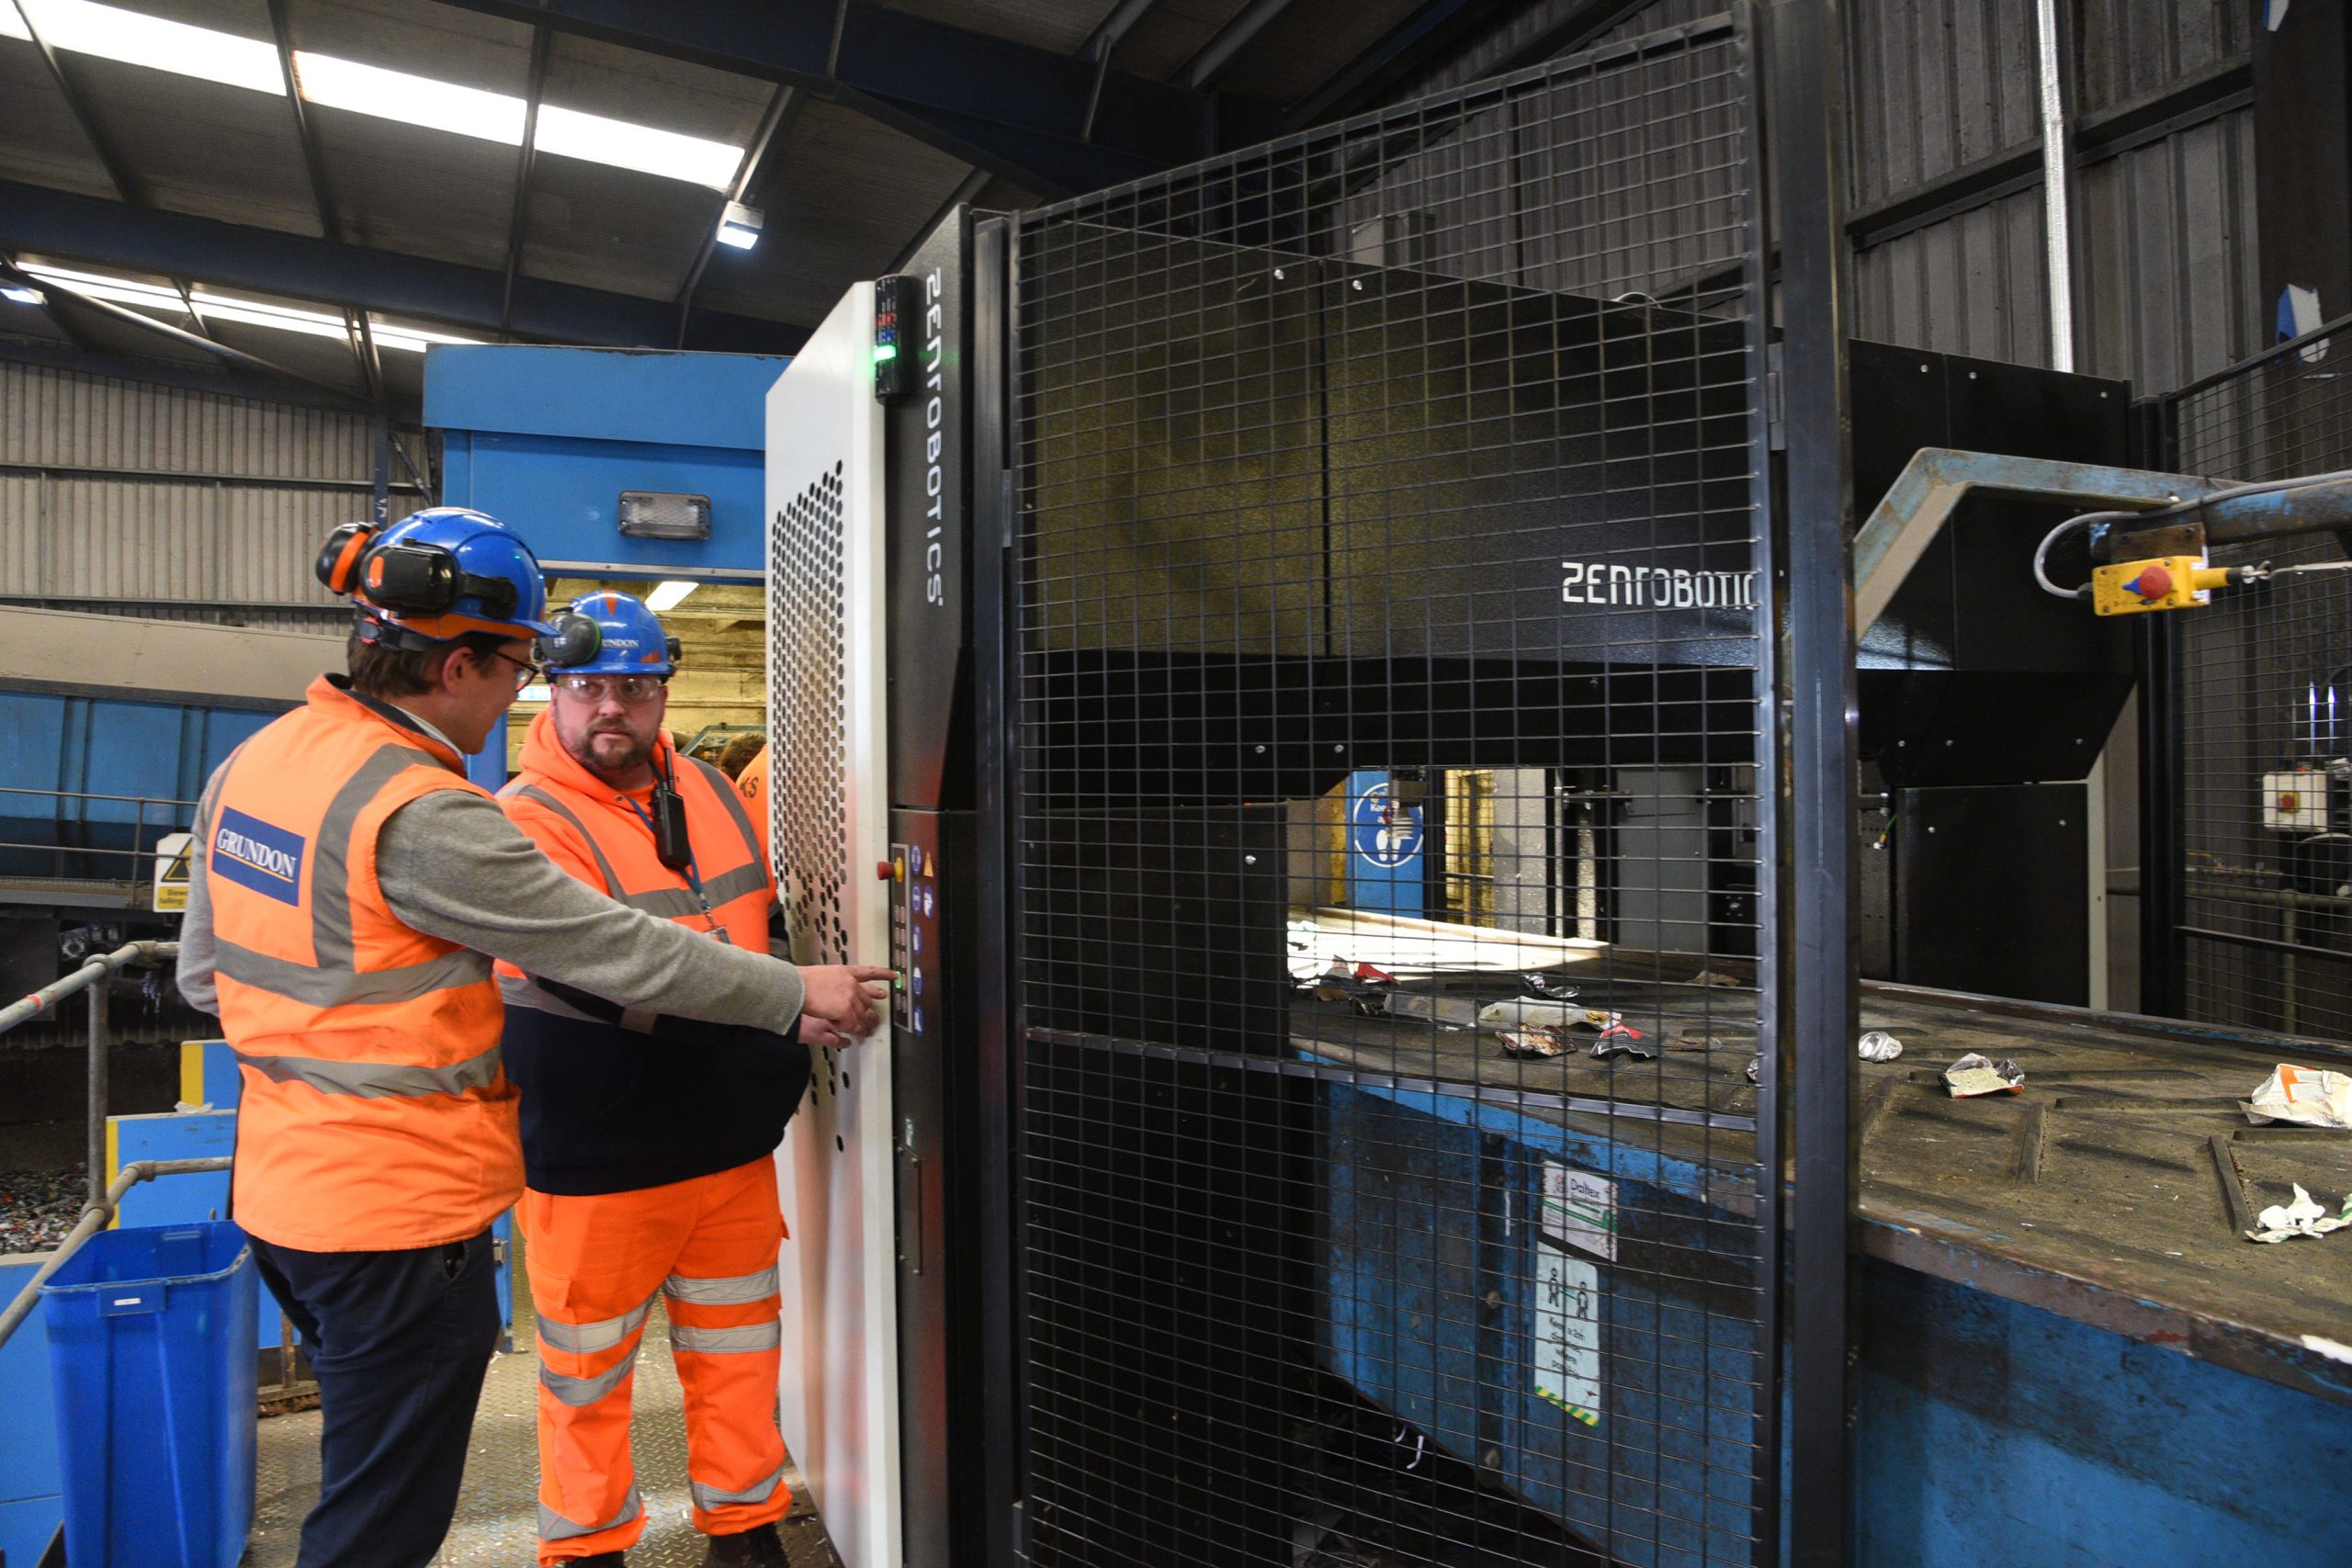 Grundon has invested in an Artificial Intelligence robotic picker at its Materials Recovery Facility in Bishop's Cleeve, near Cheltenham in Gloucestershire. The robot is being trained to sort plastic waste from local businesses, adding increase accuracy and further boosts recycling rates.